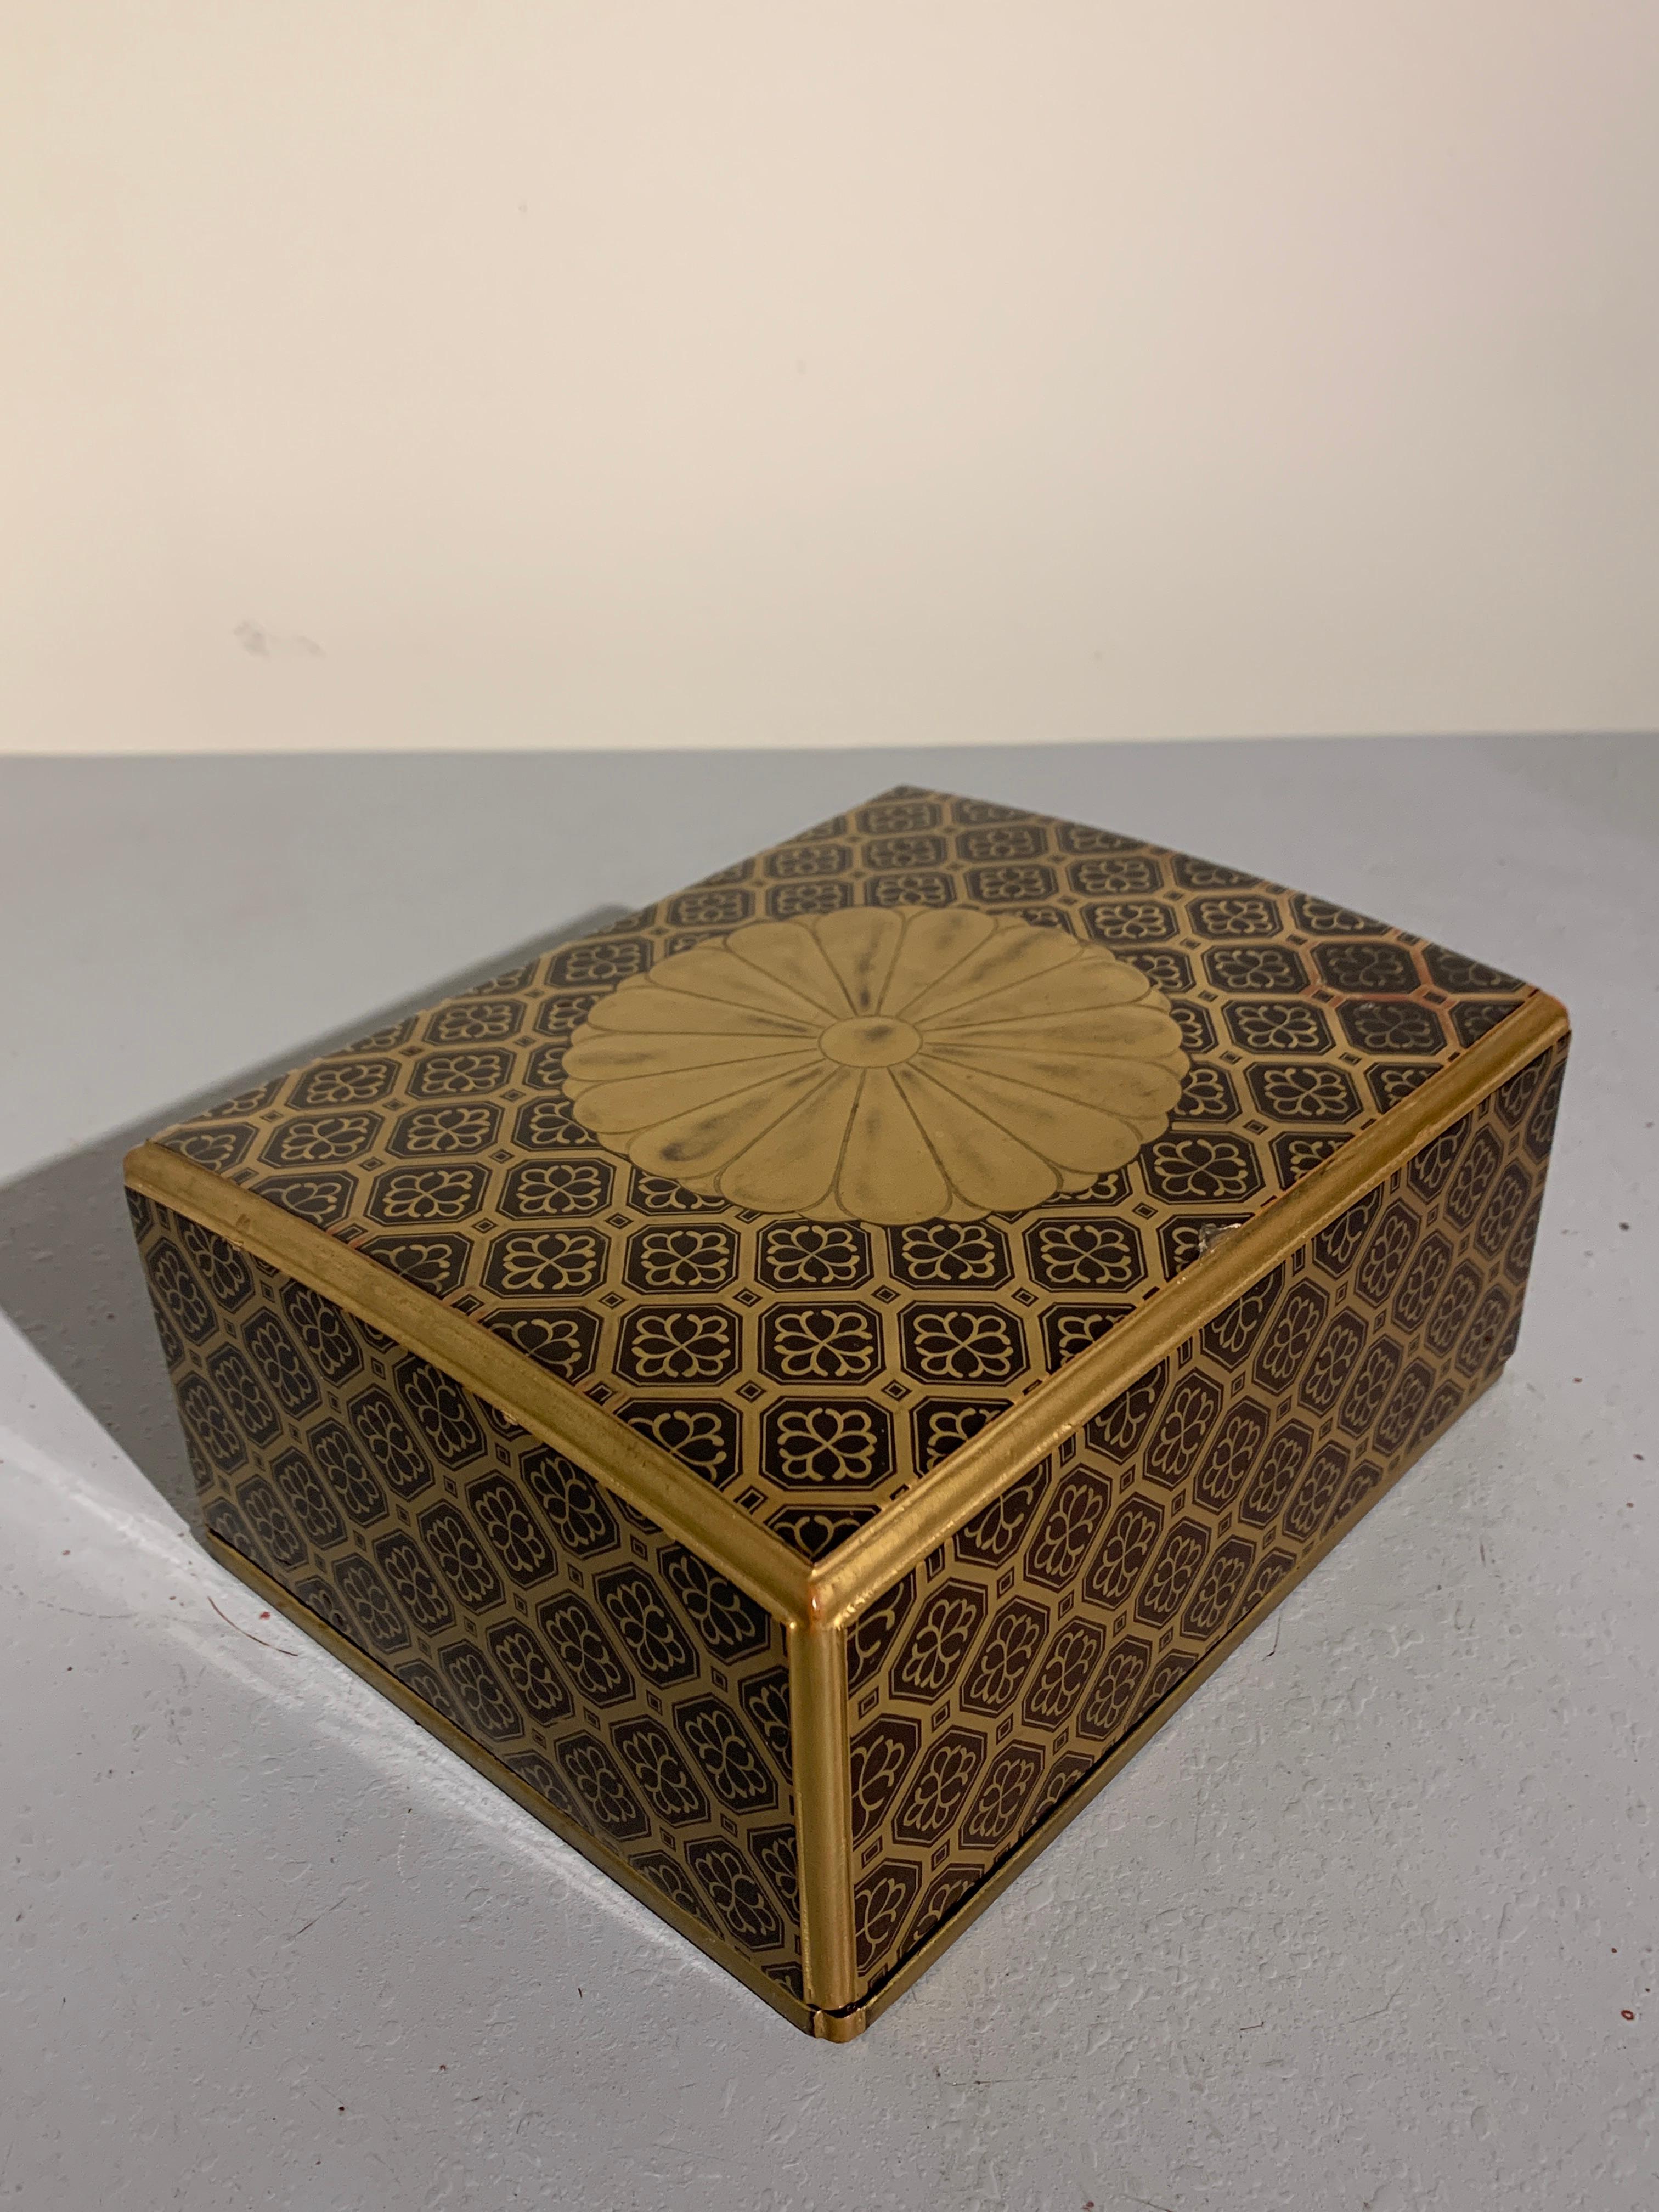 A fine and elegant Japanese sutra box, called a kyobako, in black and gold lacquer, featuring a large imperial sixteen petal chrysanthemum mon against a raised gold lacquer diaper ground, Edo period (1603-1868), late 18th century.

The imperial